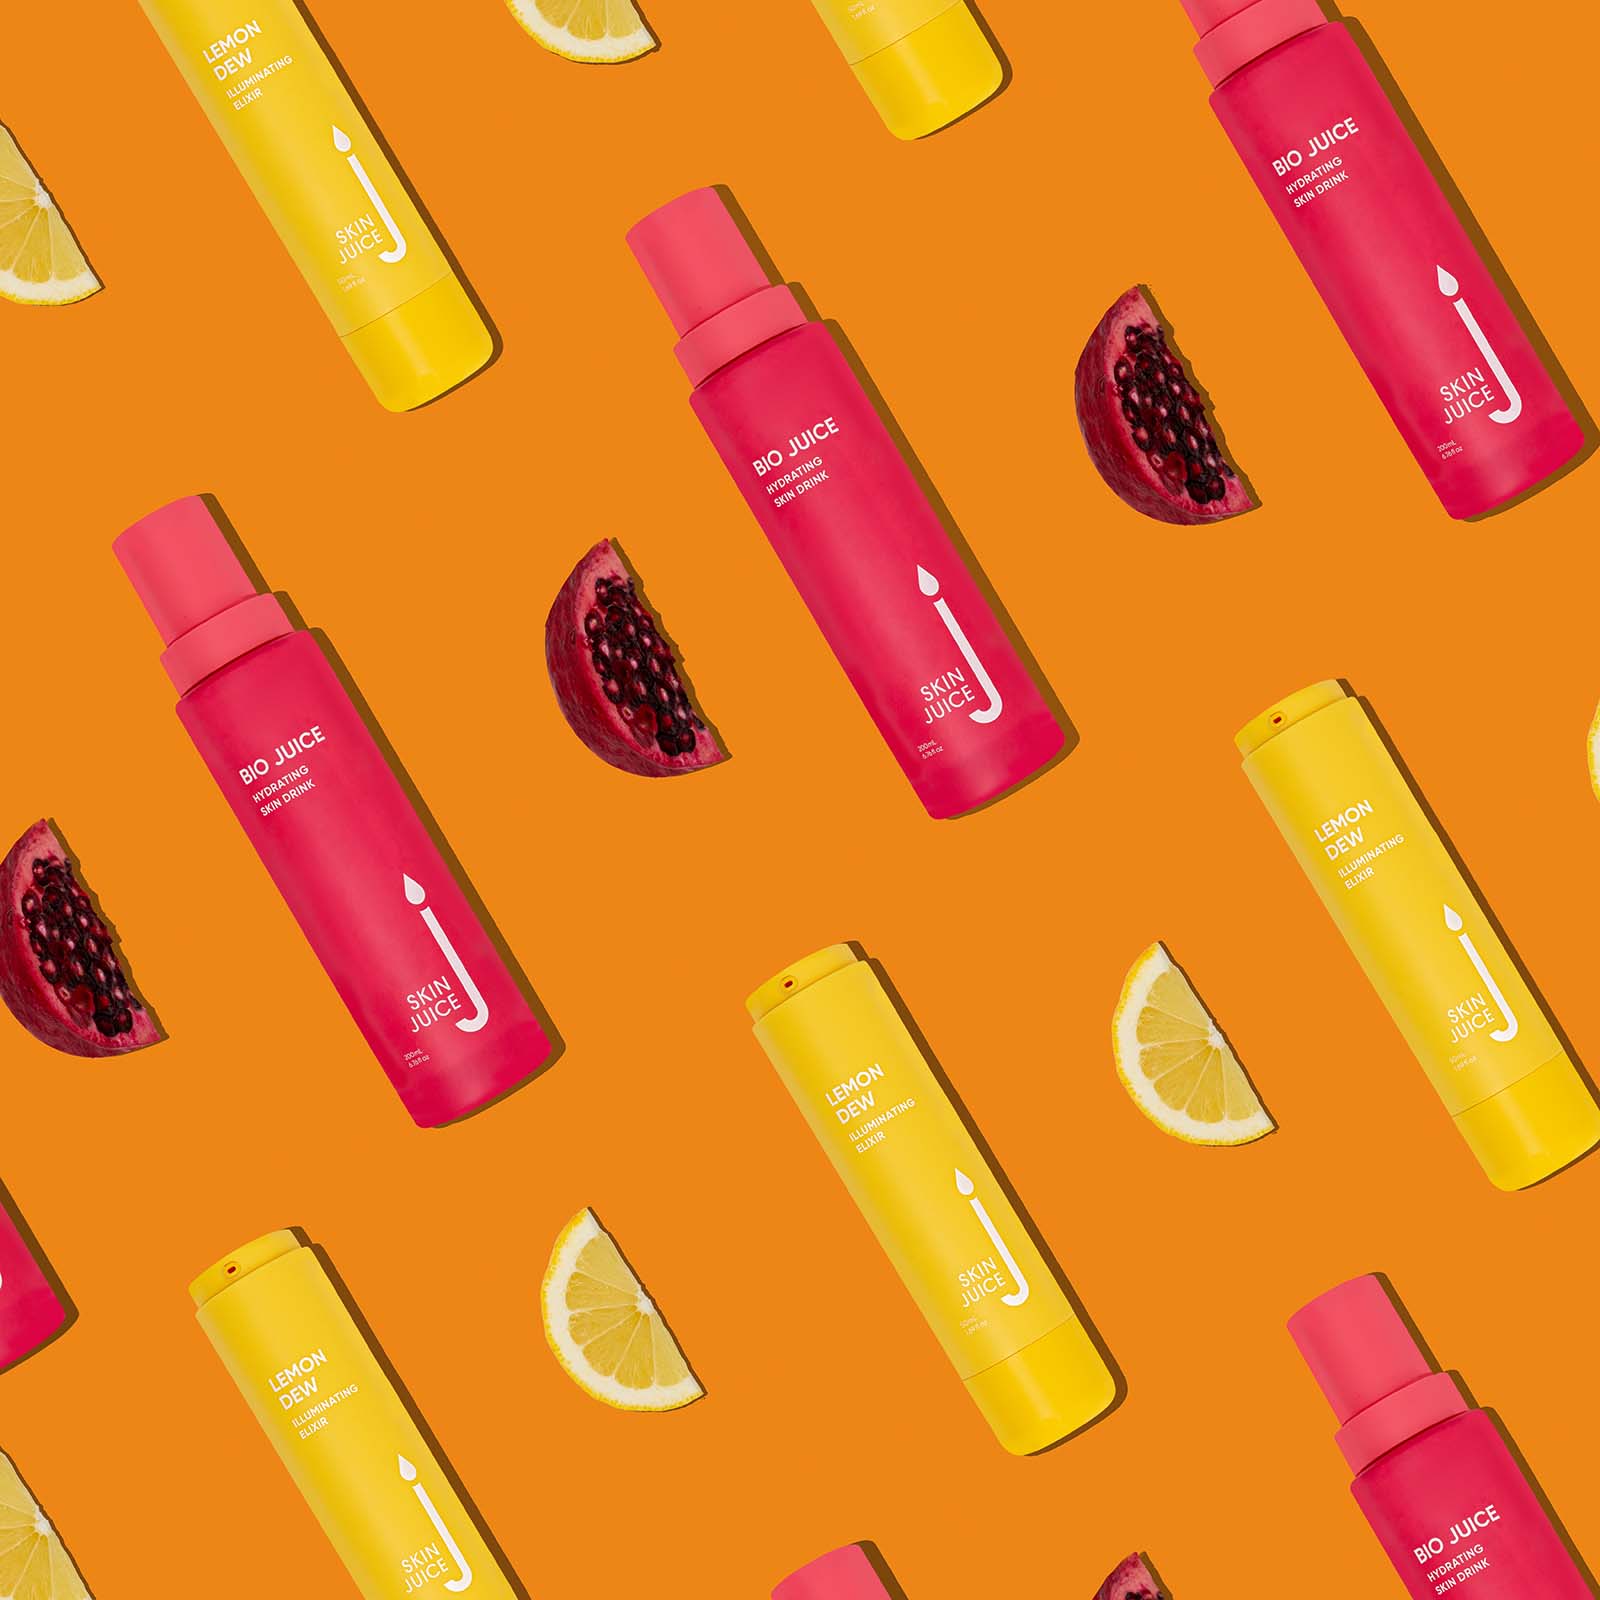 Creative product photography for a skincare brand. Colourful product still by colourpop studio